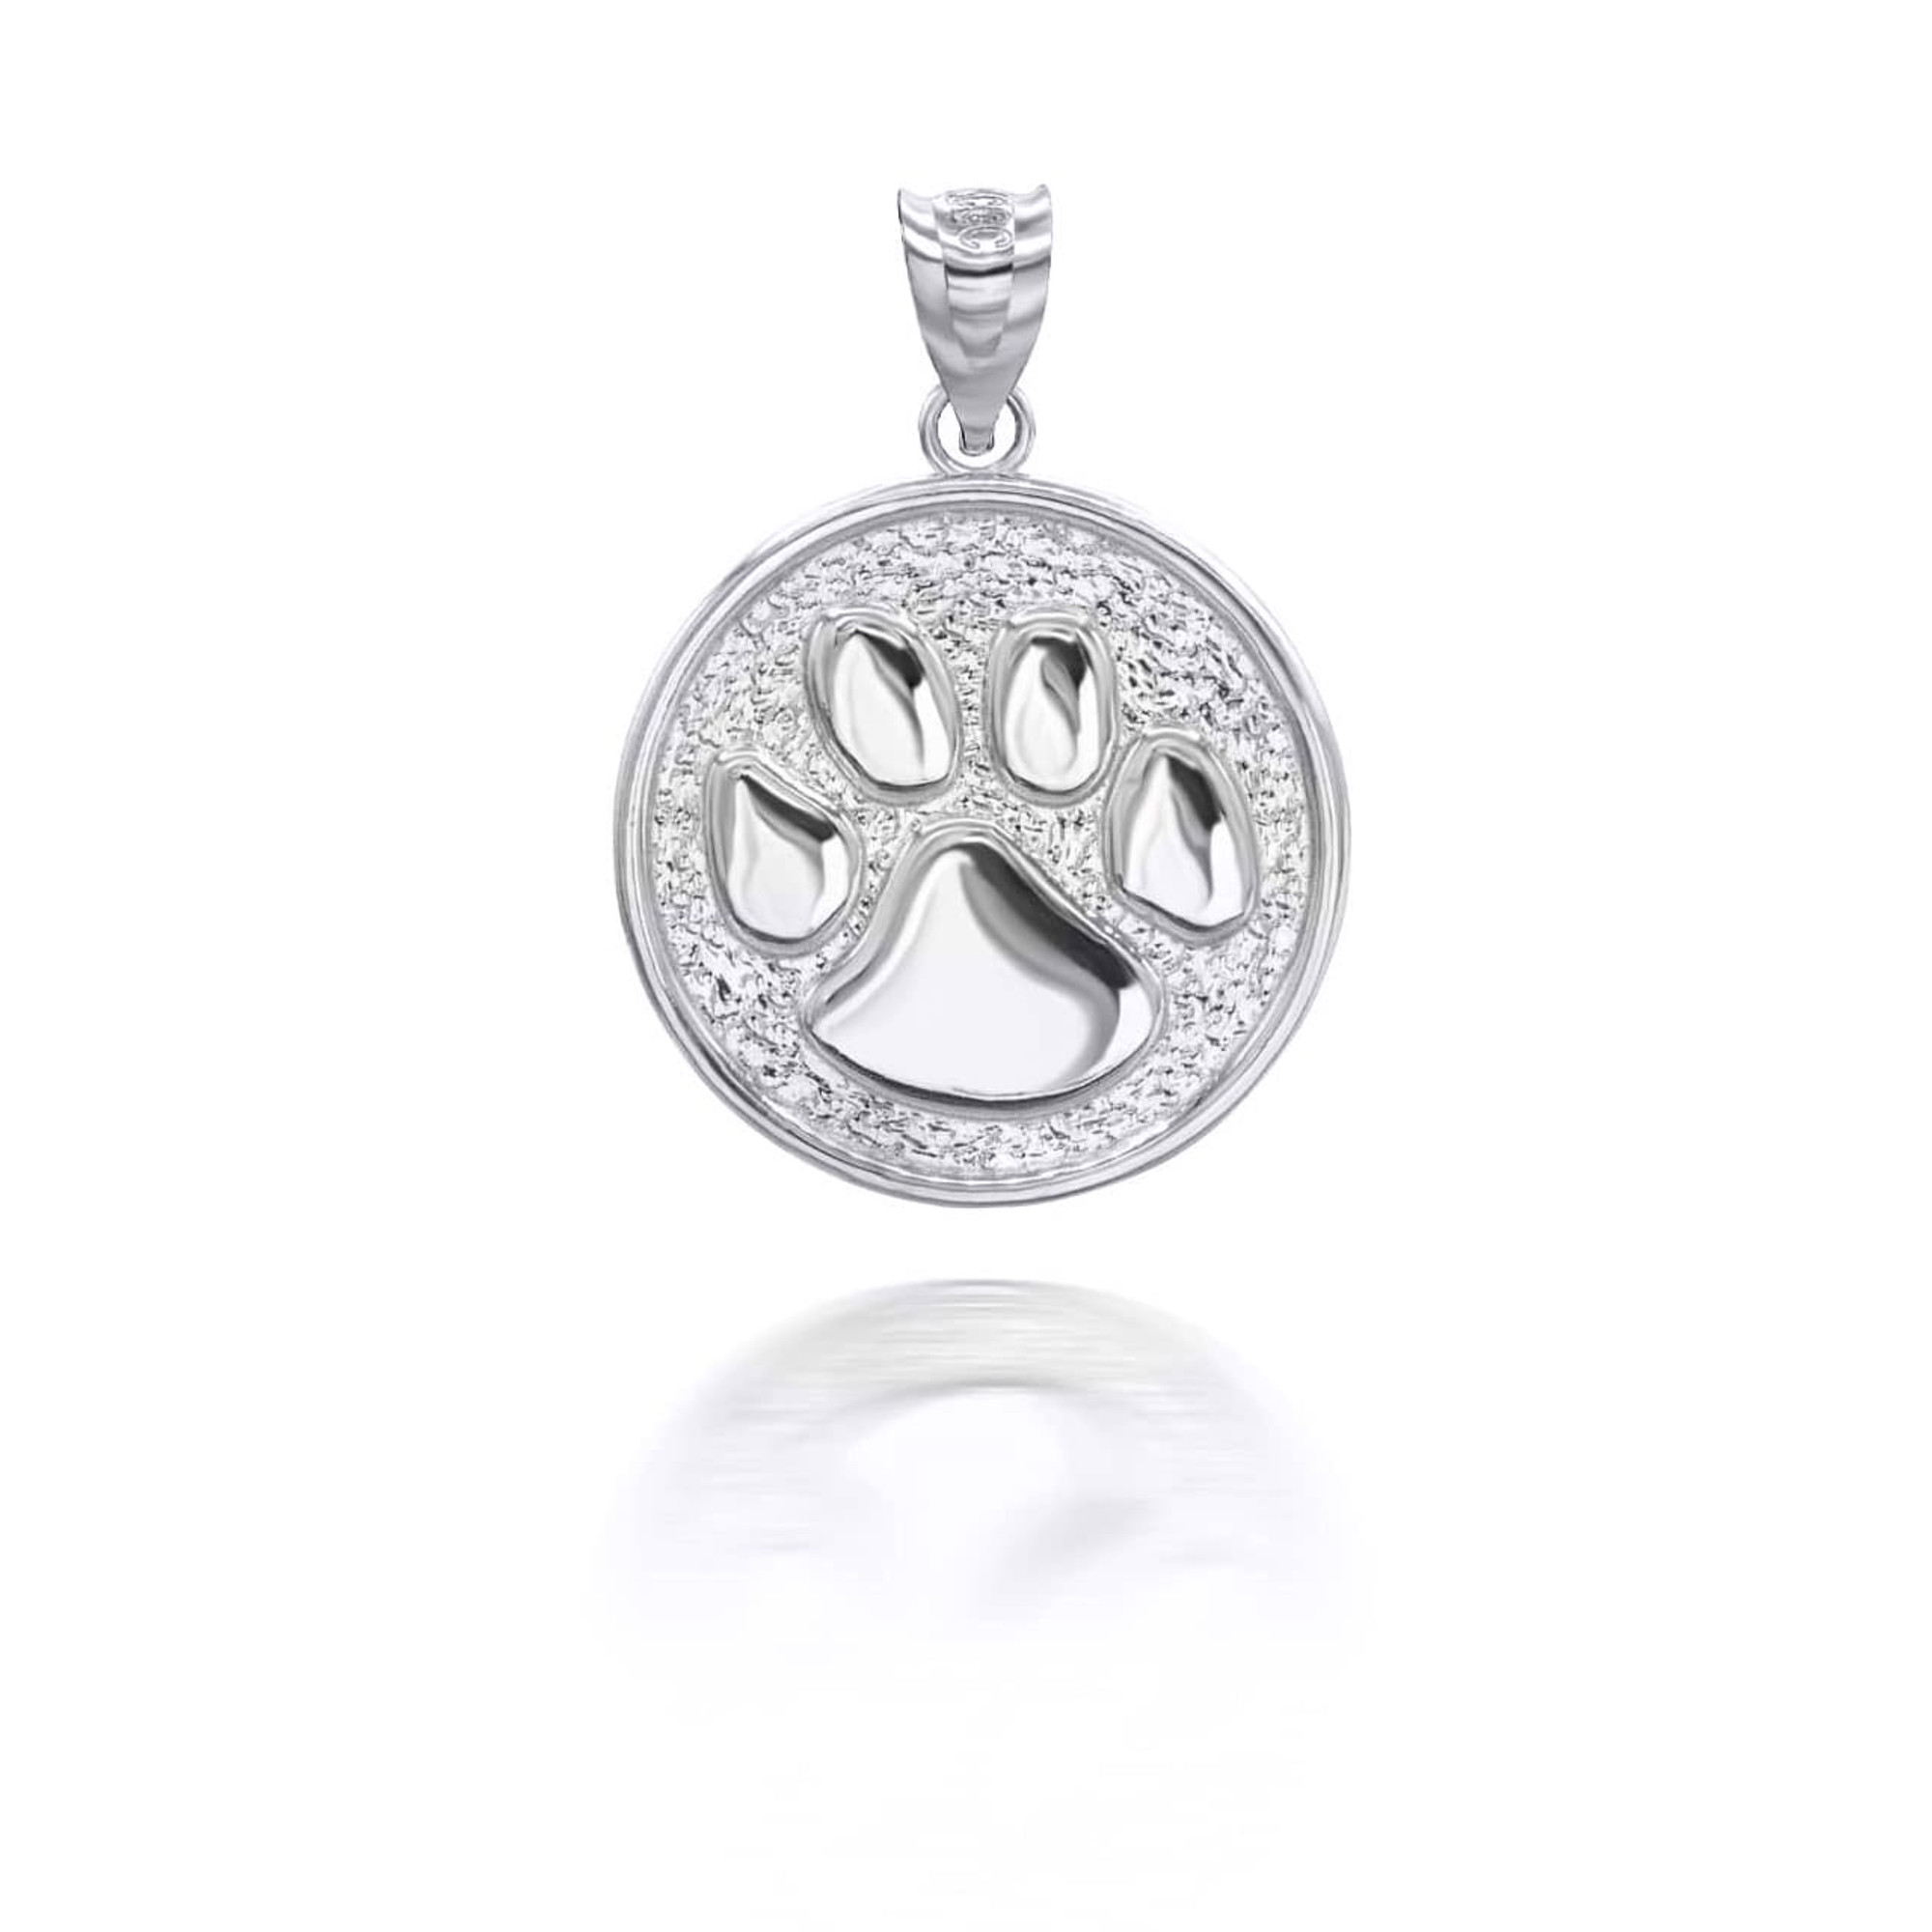 PAW PRINT TAG NECKLACE - The Littl - Sentimental Jewellery